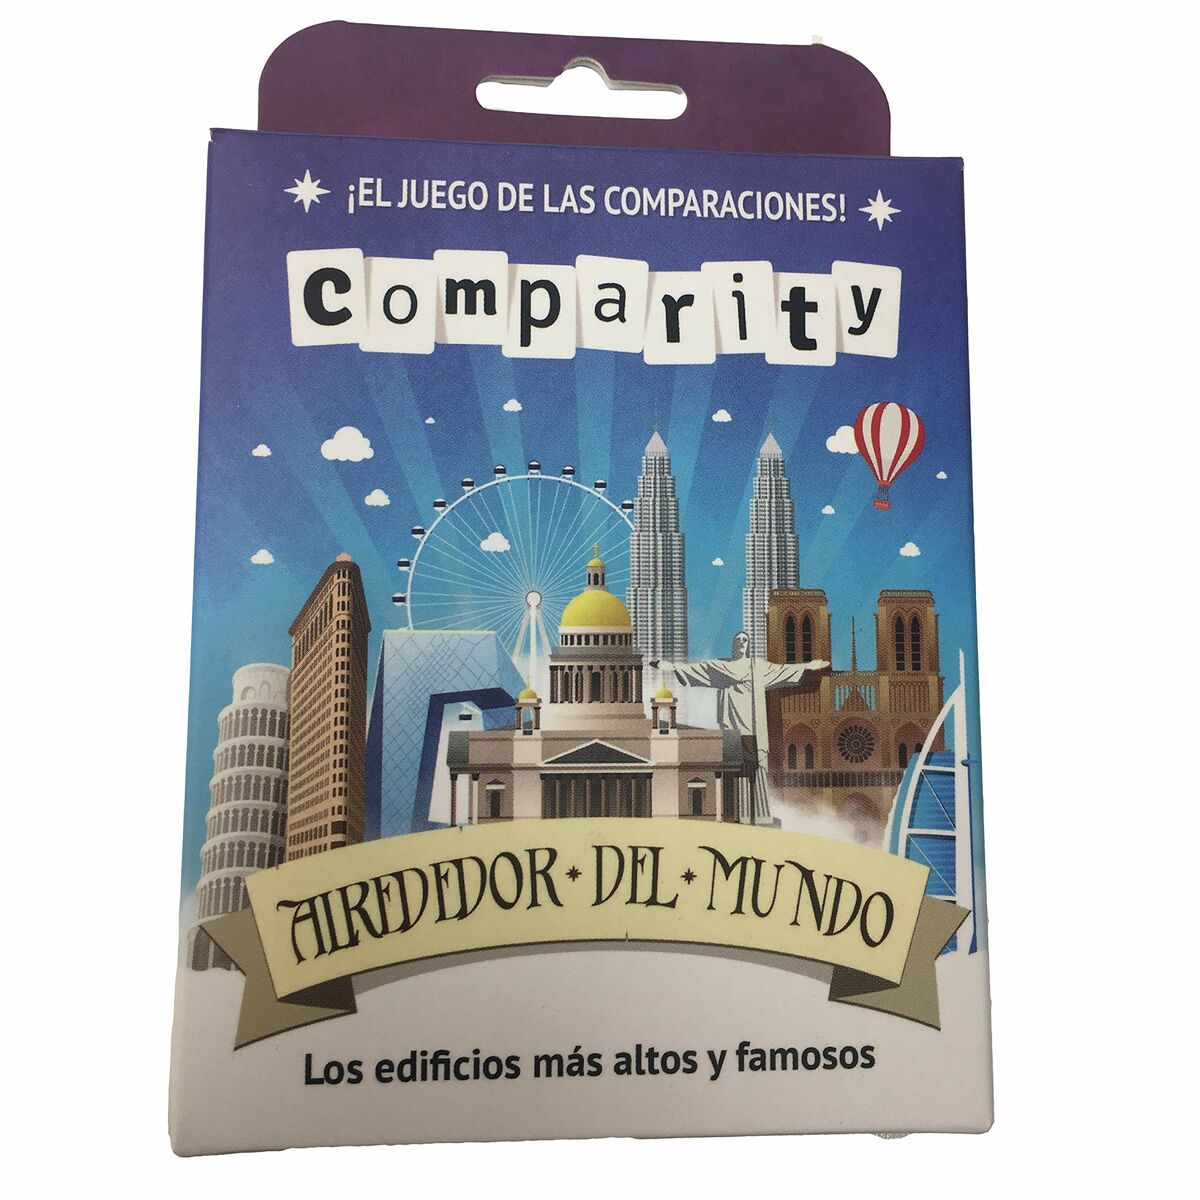 Board game Crazy Pawn Comparity: Around The World